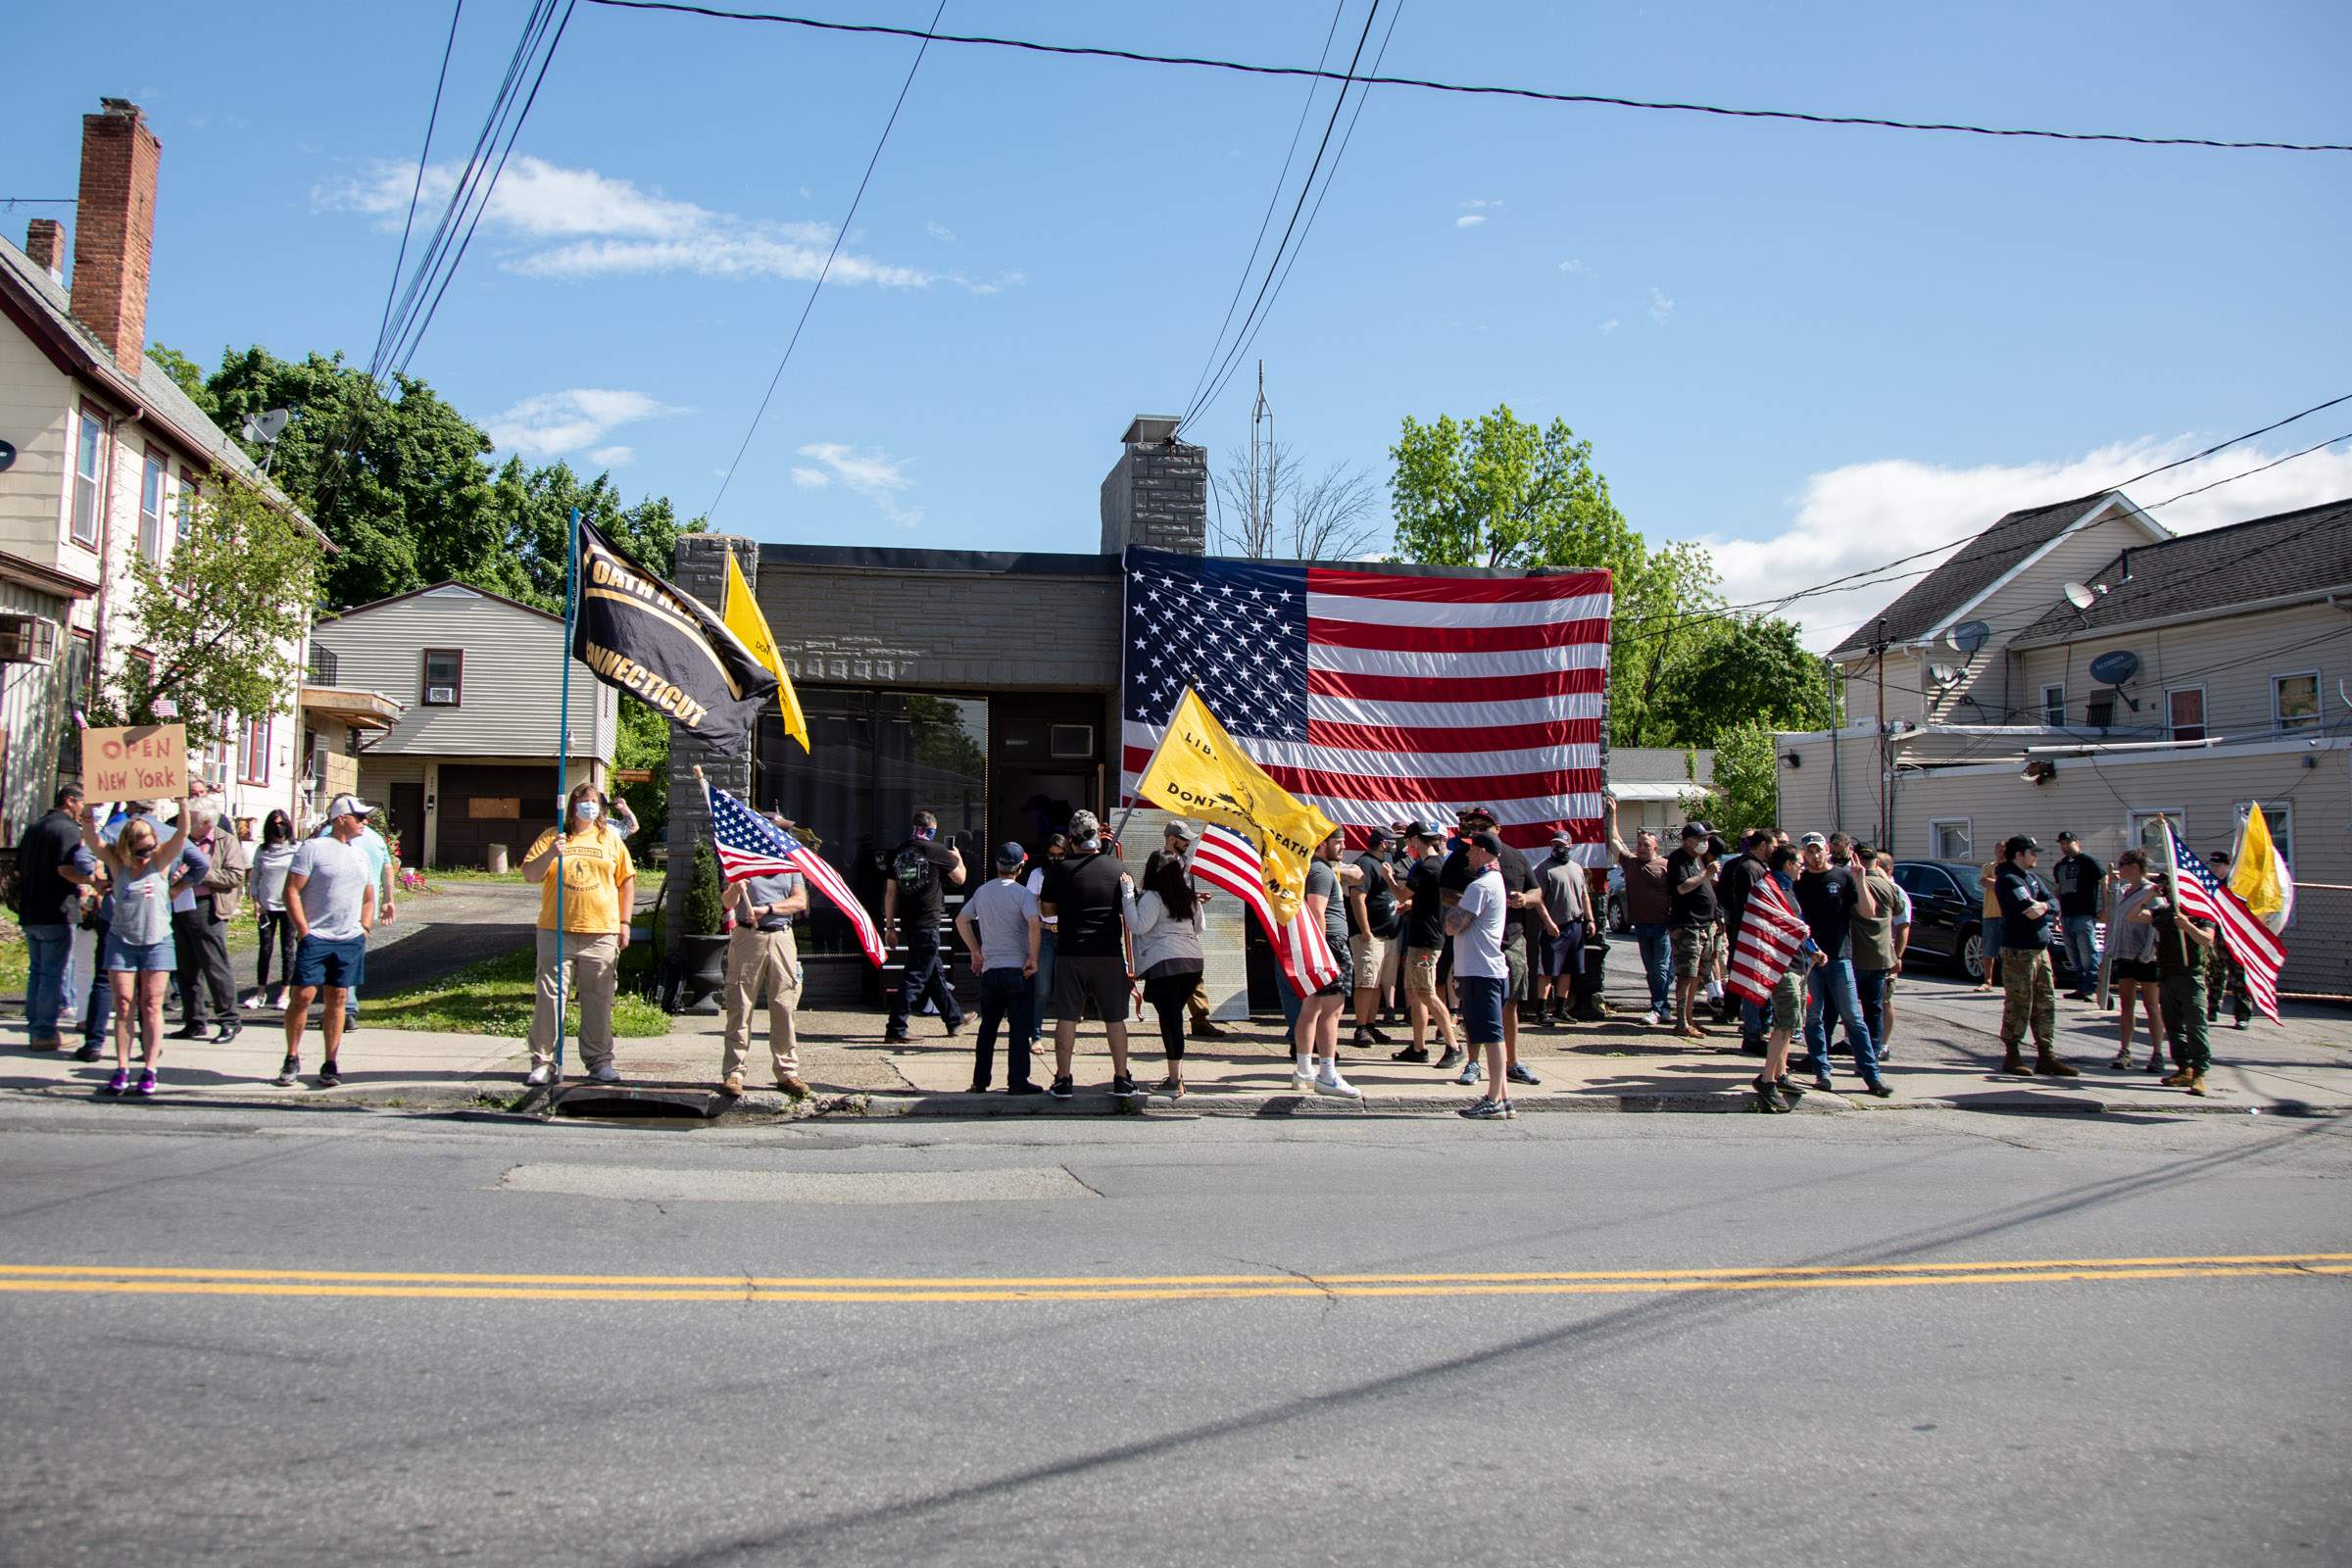 People participate in a rally outside tattoo shop Casa di Dolore in Newburgh on Saturday, May 30, 2020.